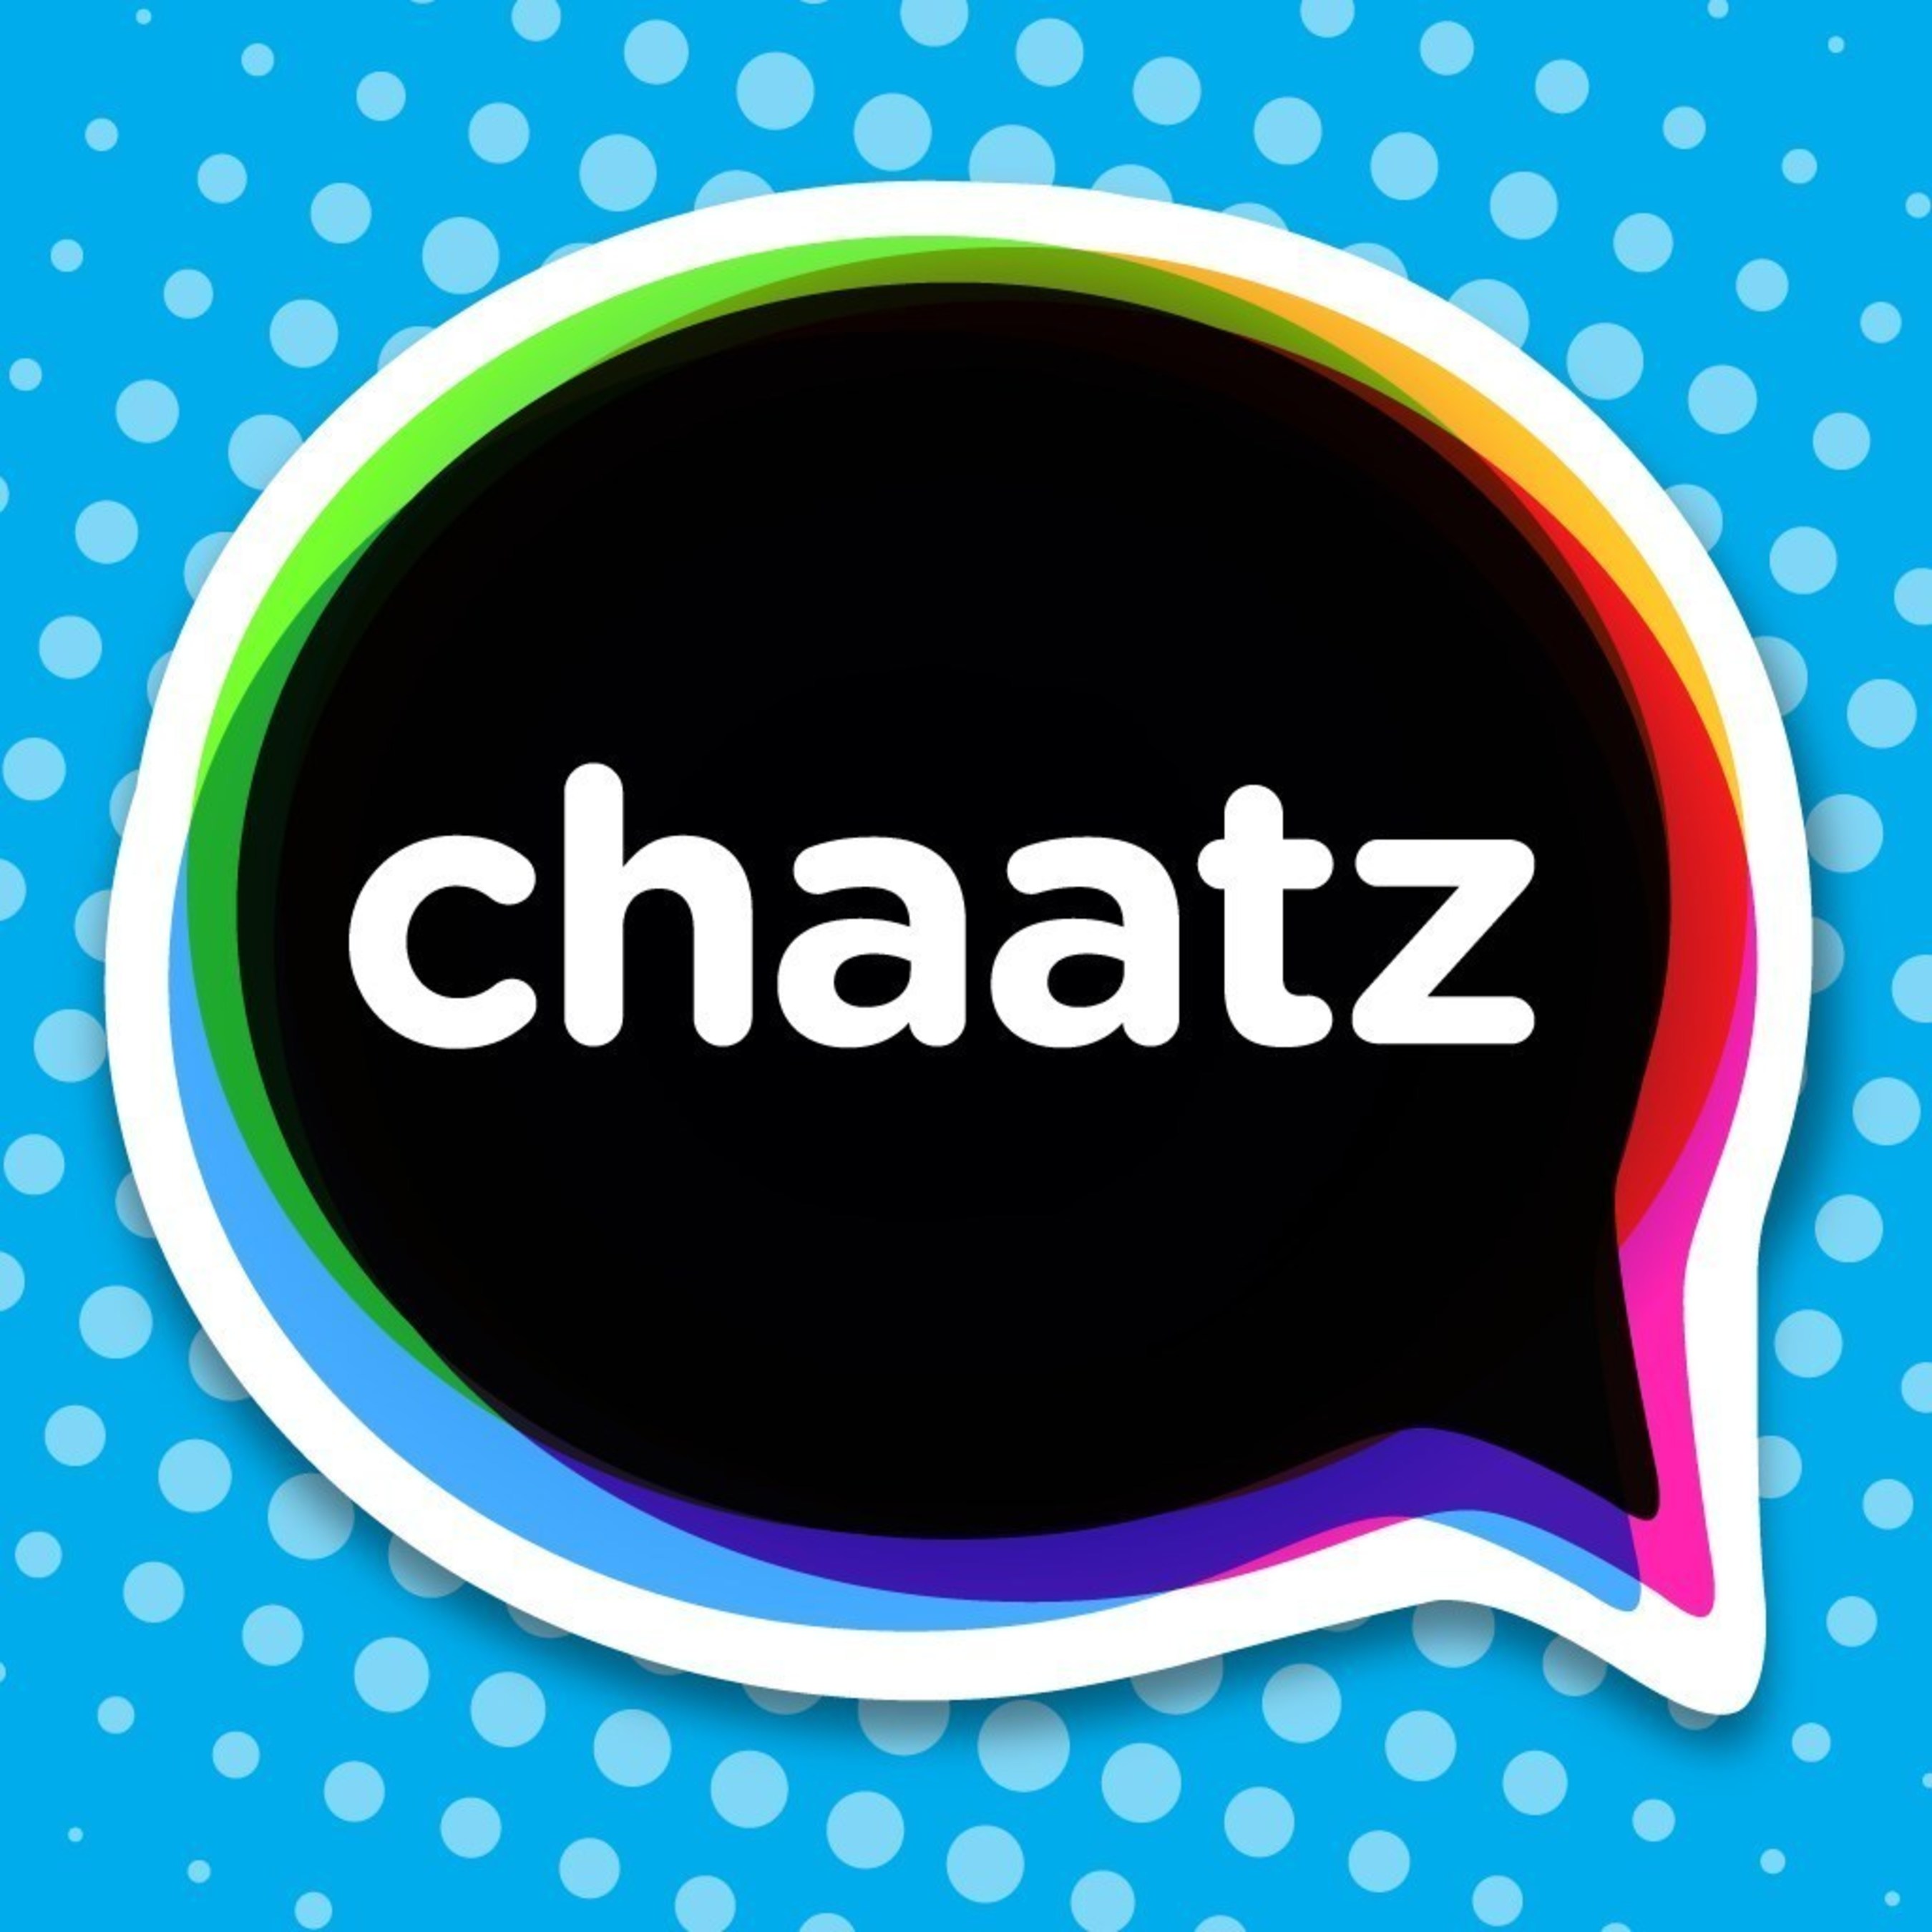 Chaatz, the Social Messaging App that Takes Messaging to a Whole New Level